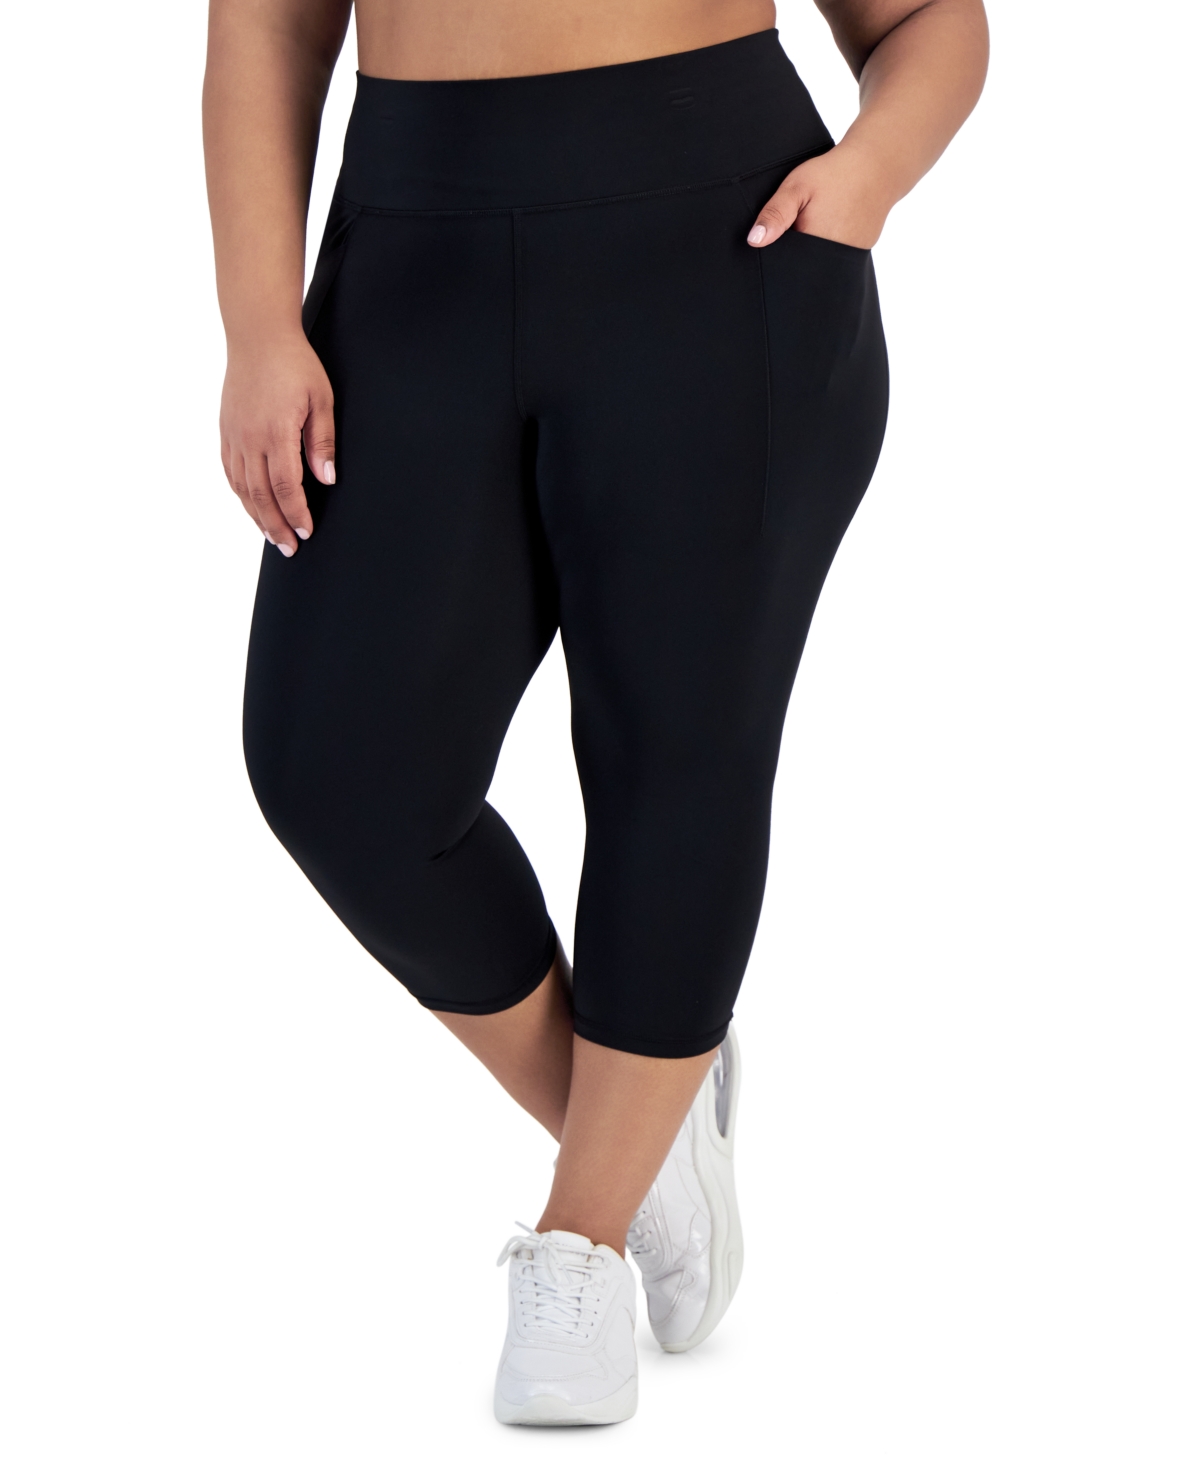 Women's Plus Size Cropped 7/8 Leggings, Created for Macy's - Deep Charcoal